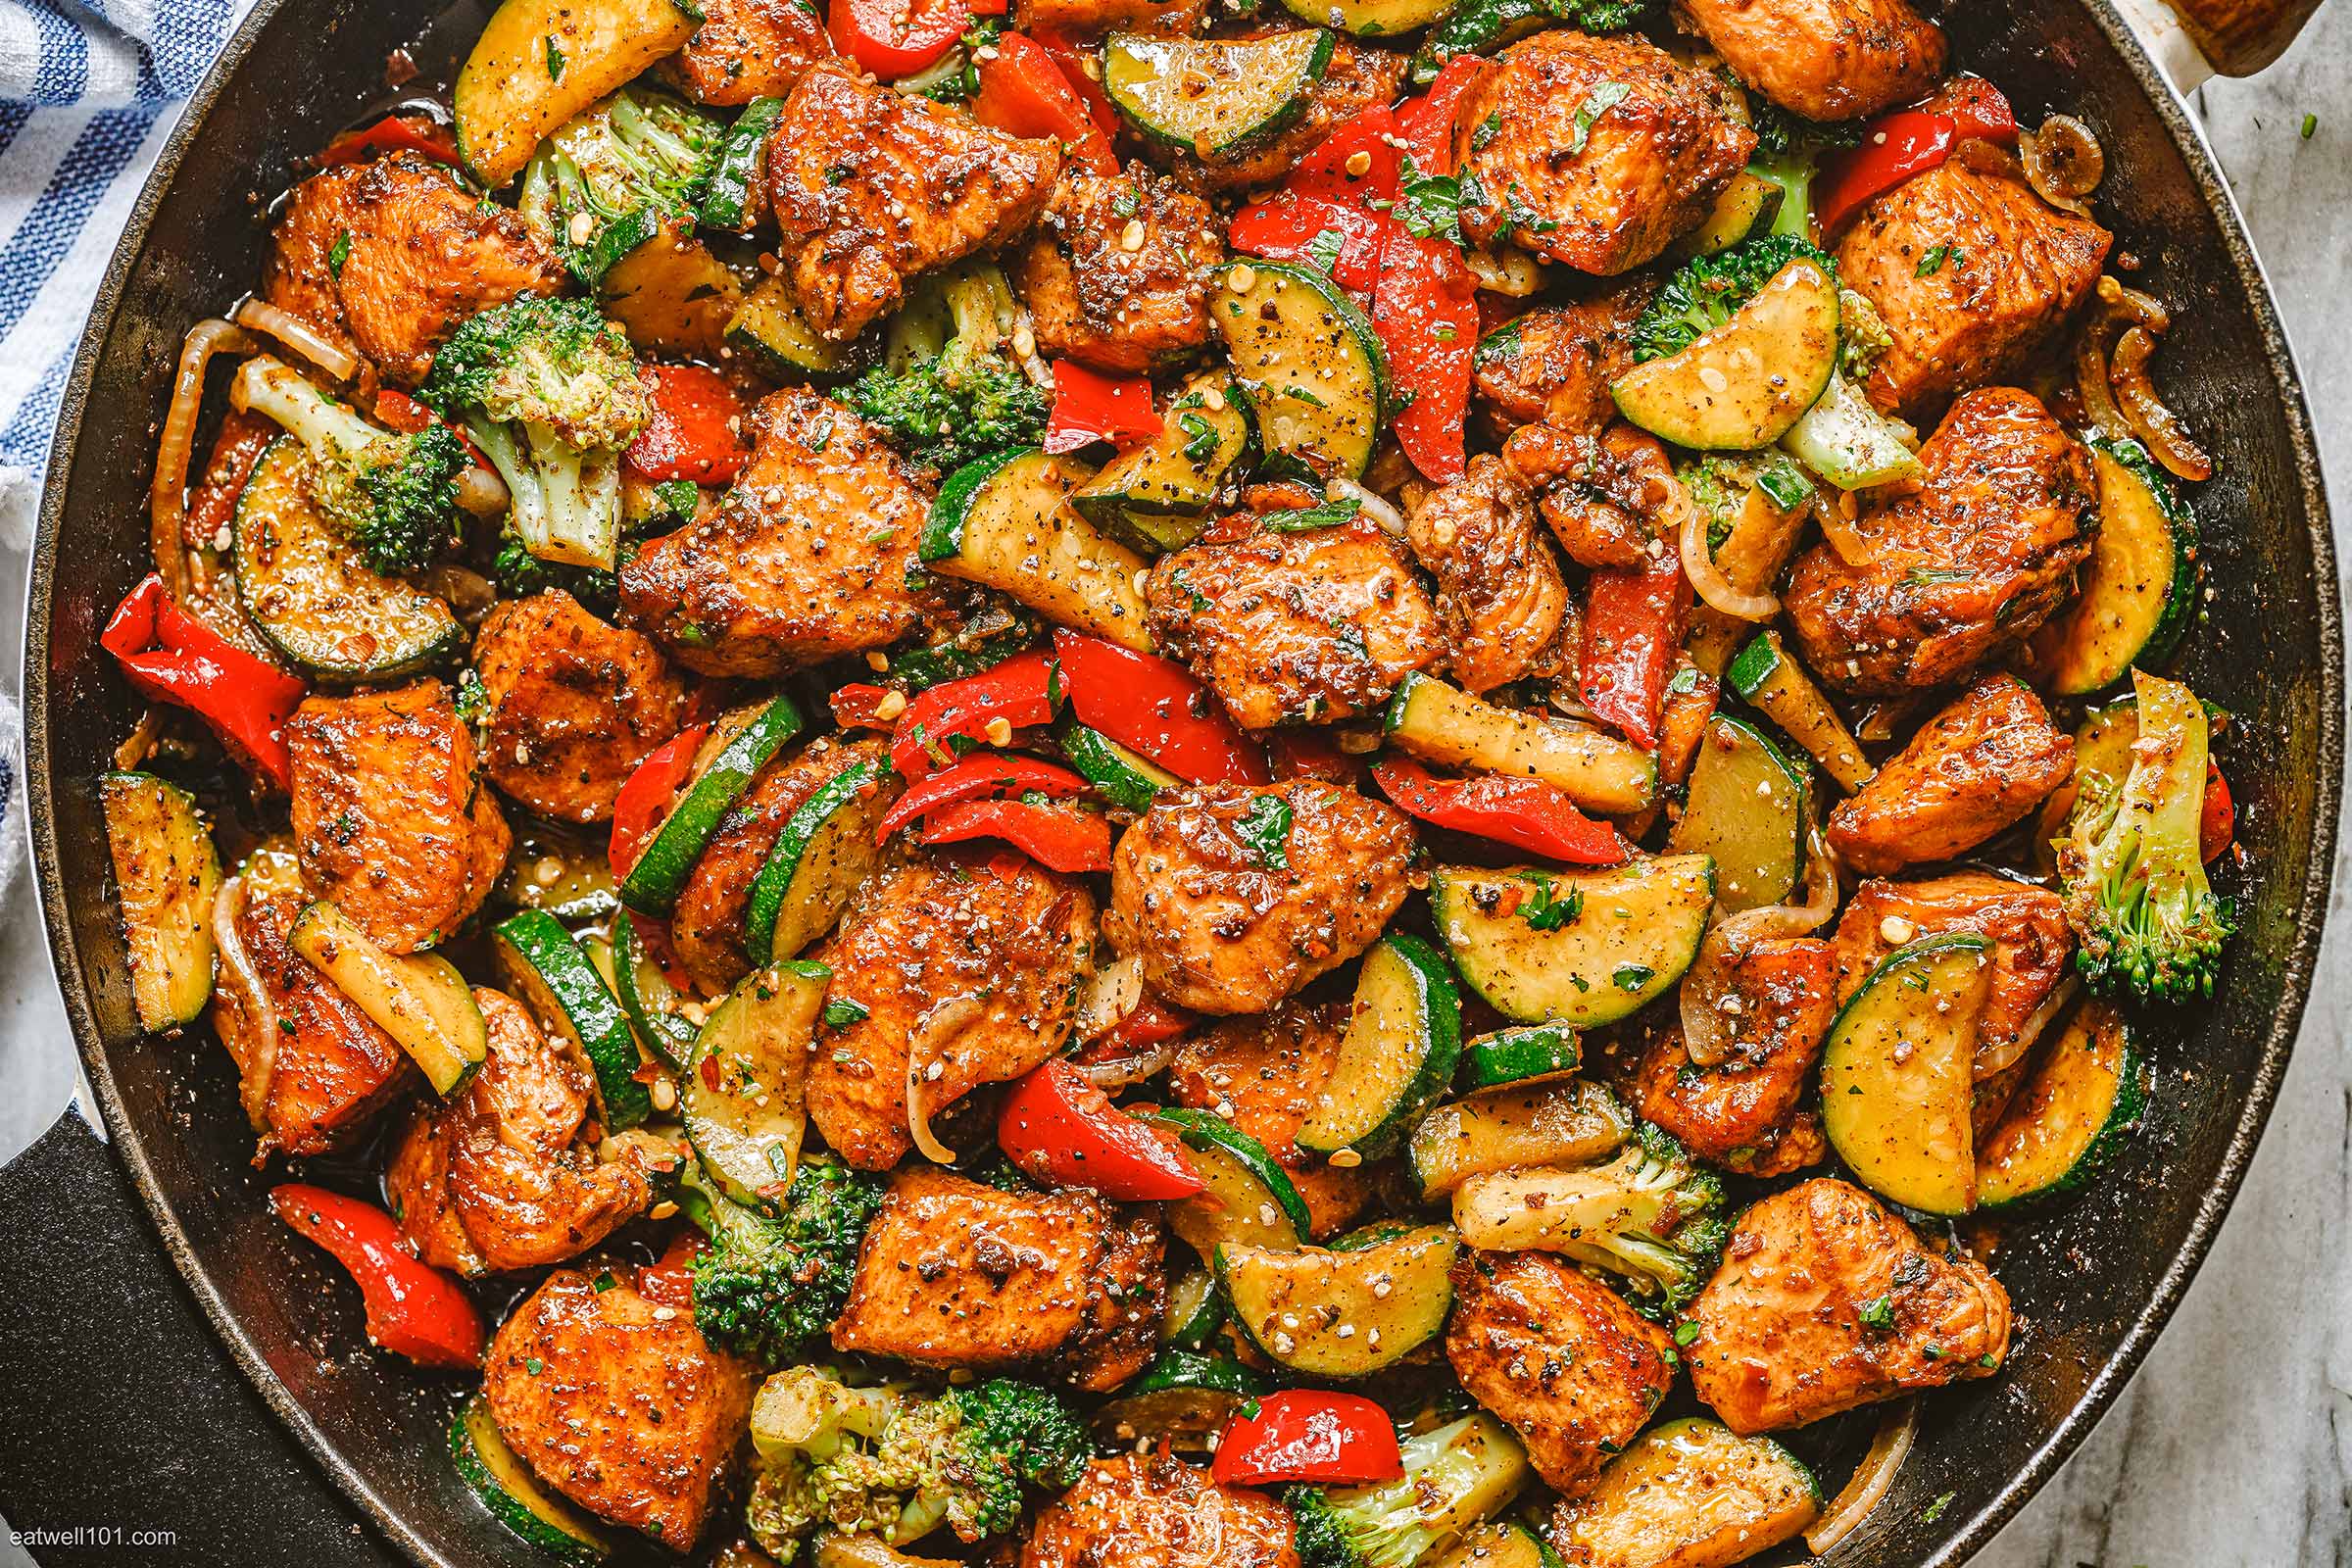 https://www.eatwell101.com/wp-content/uploads/2021/07/Healthy-Chicken-with-Vegetable-Skillet-1.jpg